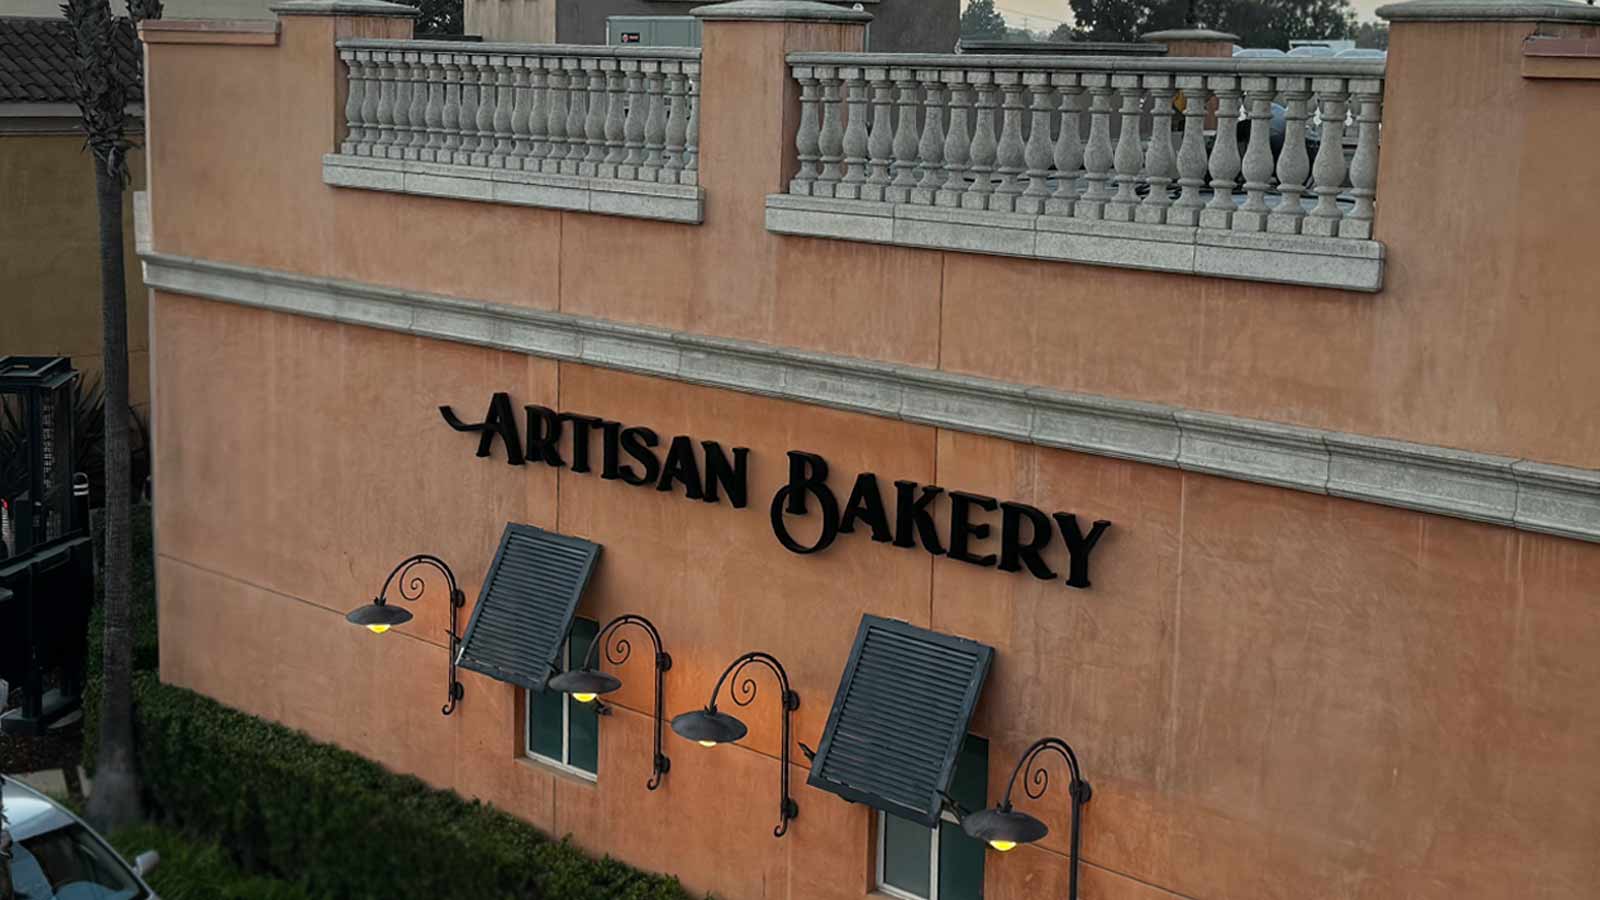 crust artisan bakery store sign on the exterior wall